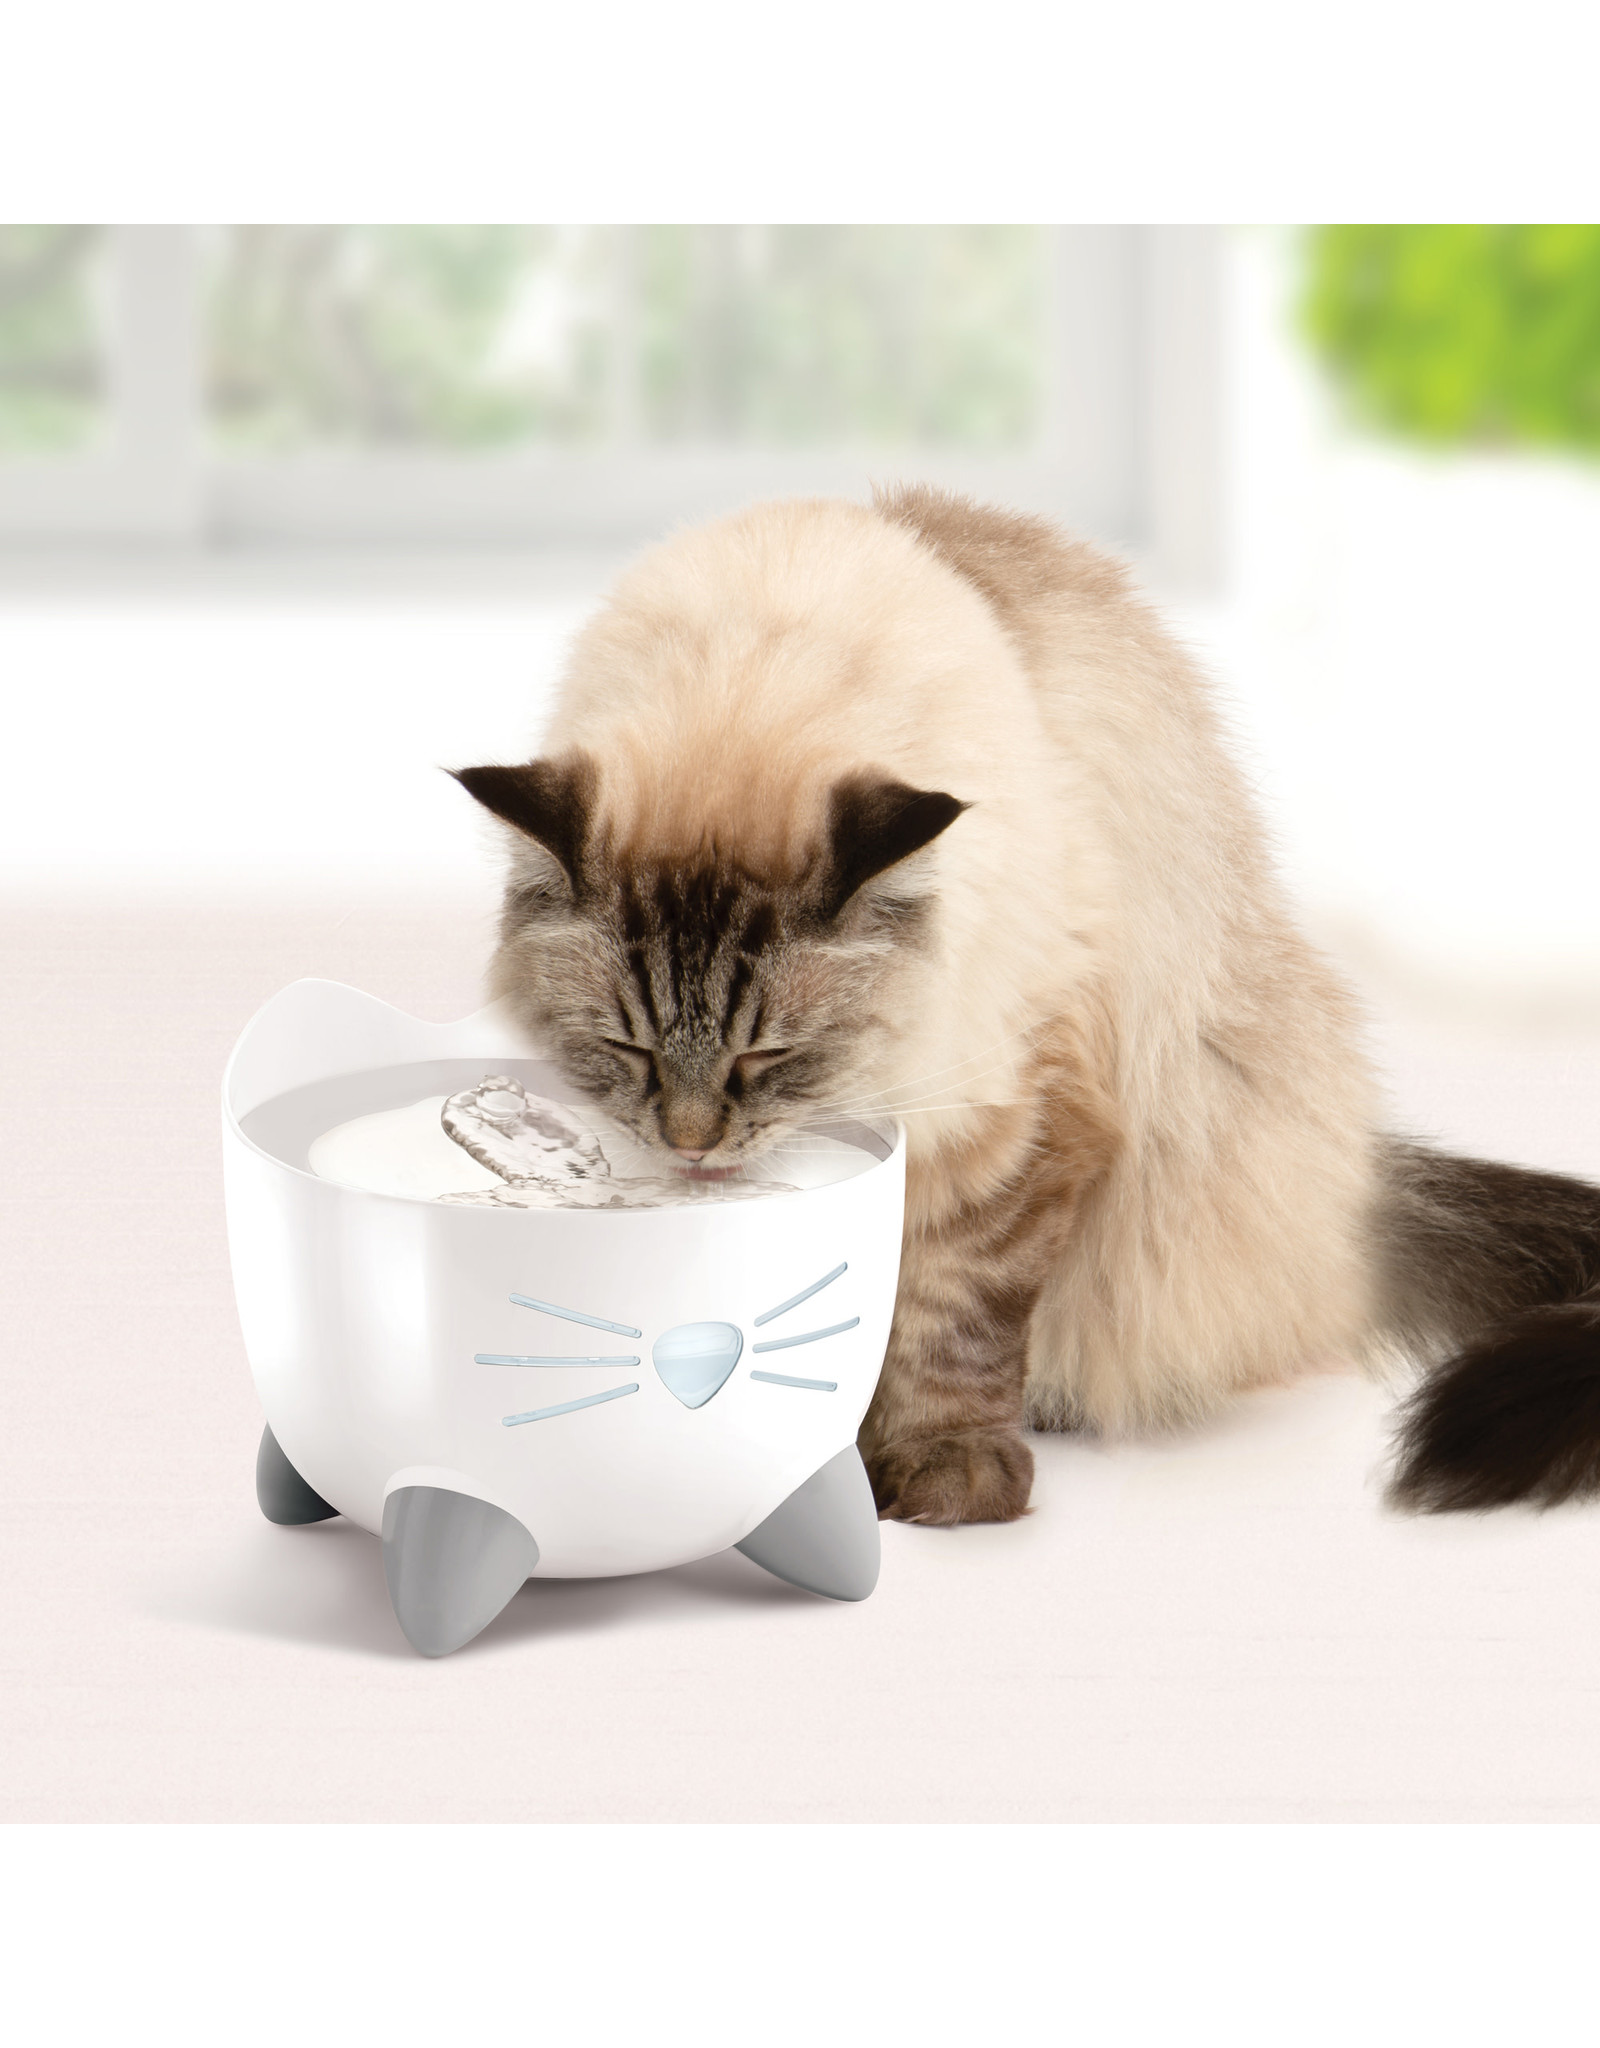 CatIt Catit PIXI Fountain White with Stainless Steel Top 2.5L